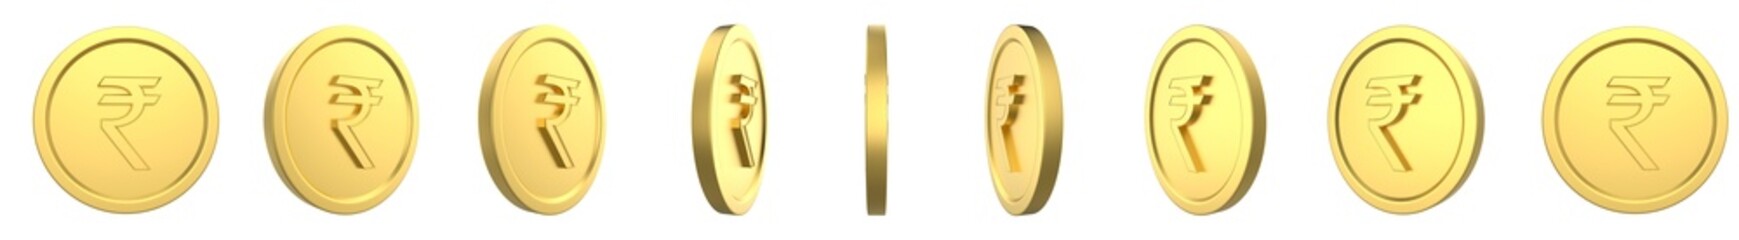 3D Illustration of the Indian Rupee symbol on the gold coin from all angles